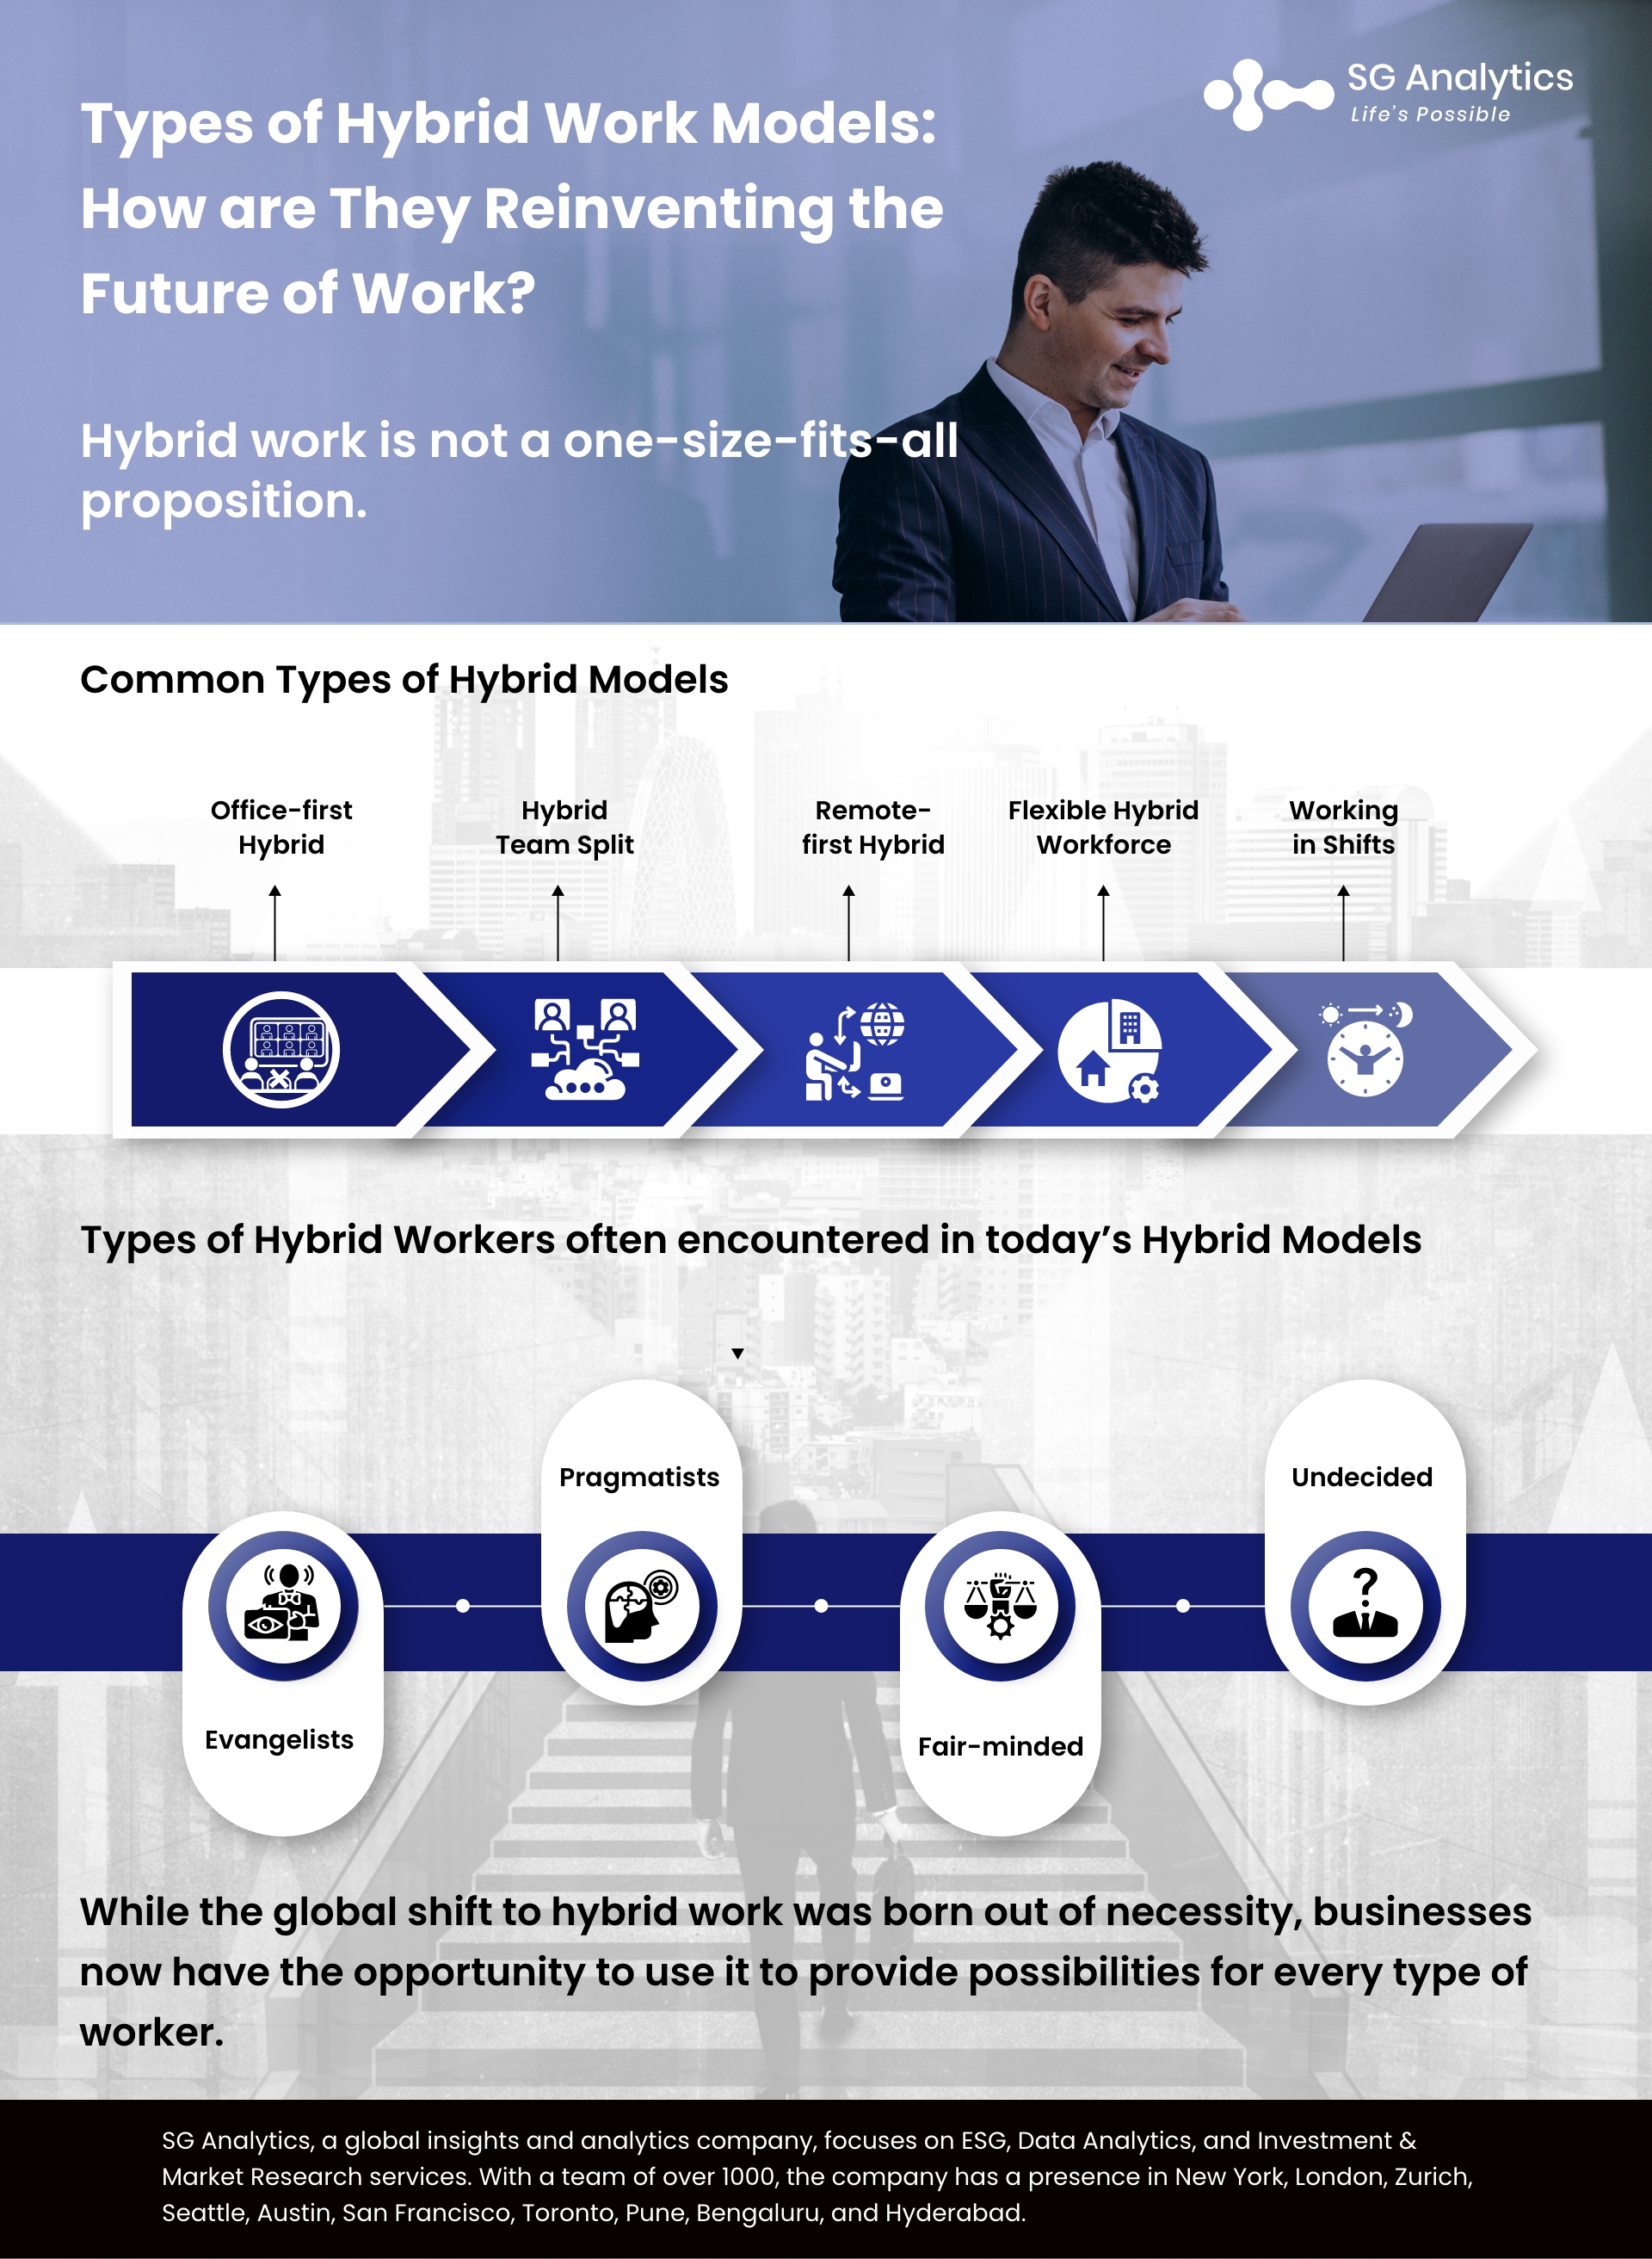 SG Analytics_Types of Hybrid Work Models How are they Reinventing the Future of Work